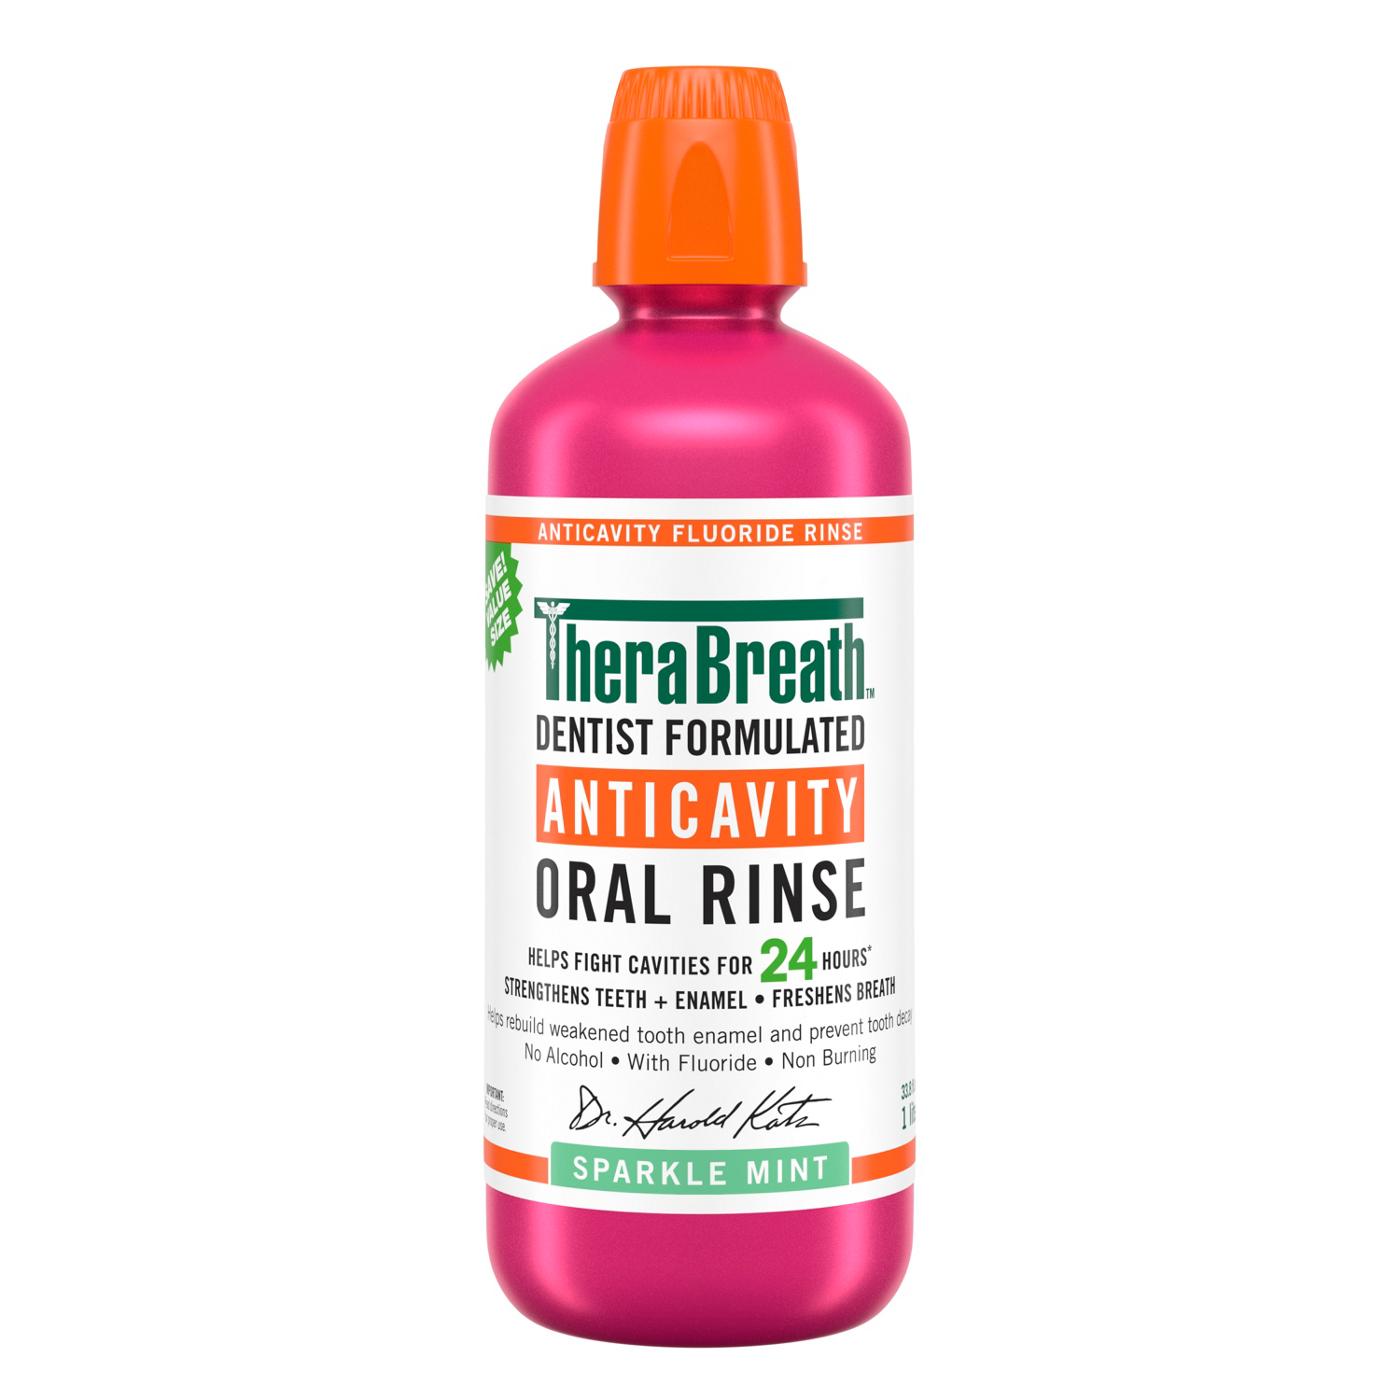 TheraBreath Anticavity Fluoride Mouthwash - Sparkle Mint; image 1 of 5